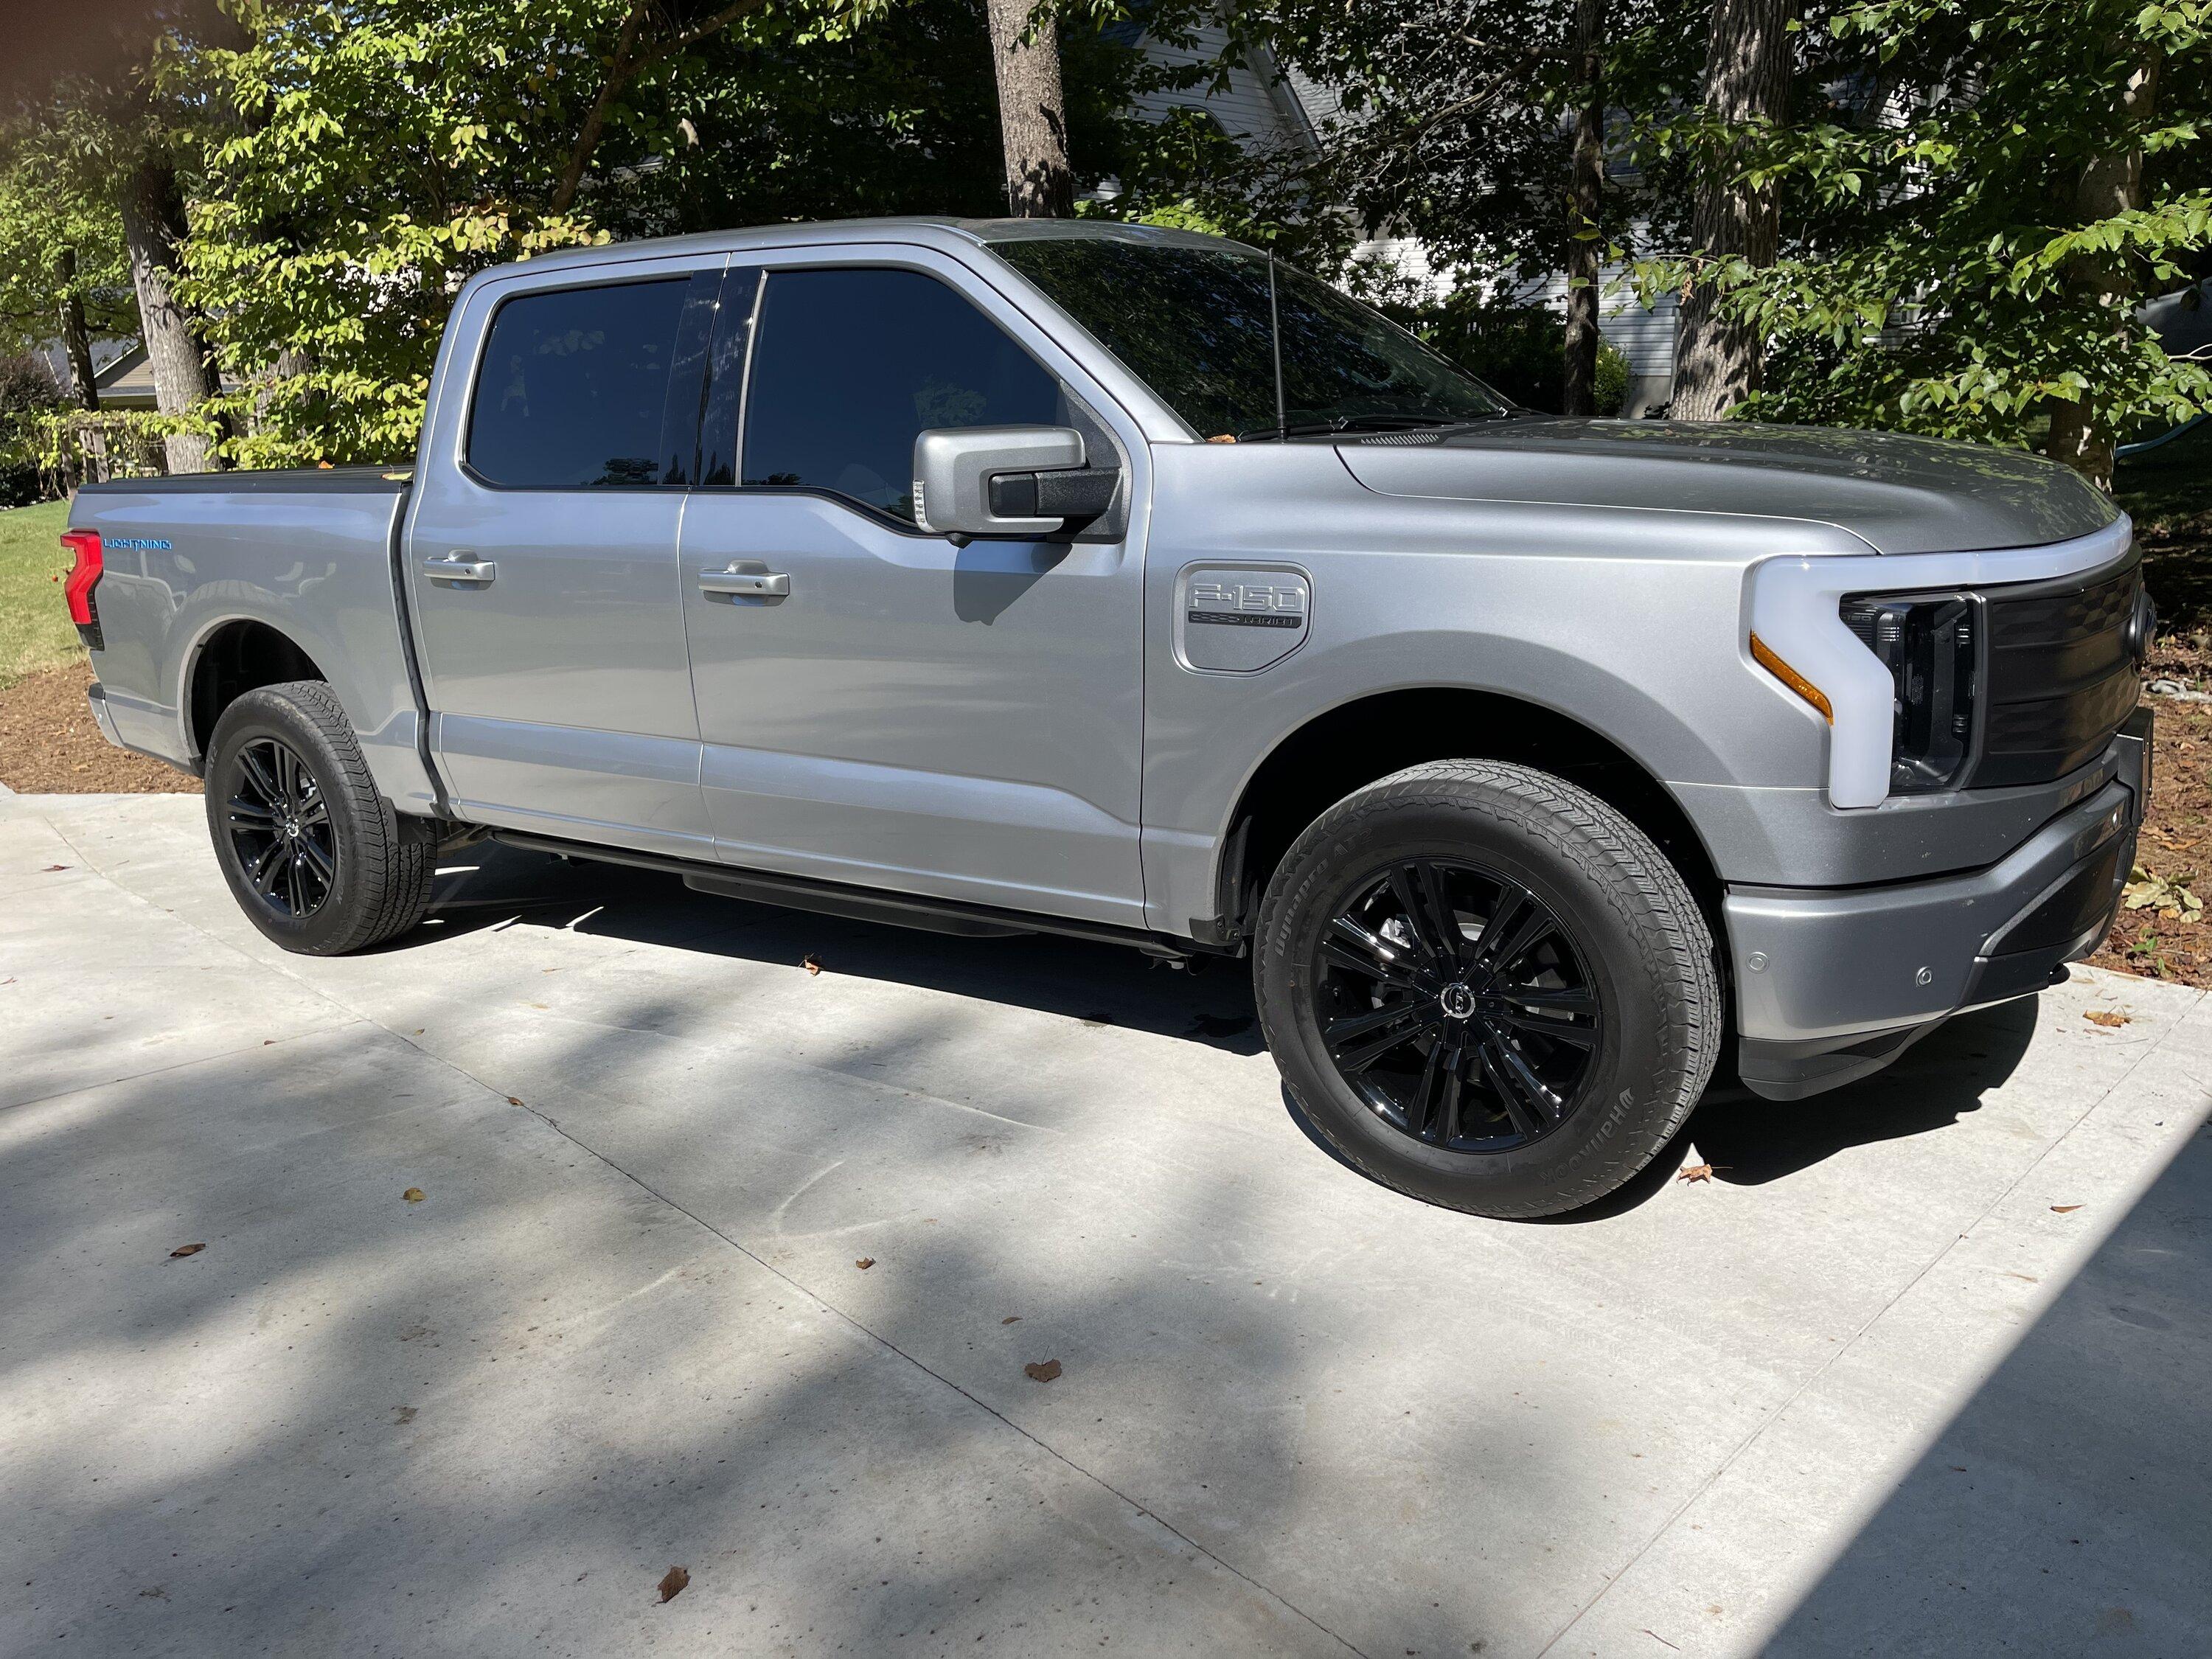 Ford F-150 Lightning Gloss black 20" wheels on my Lightning Lariat with stock AT tires, tints, AMP Power Steps CB78AA0B-A6FA-4E7D-AC80-42B4561FA18F